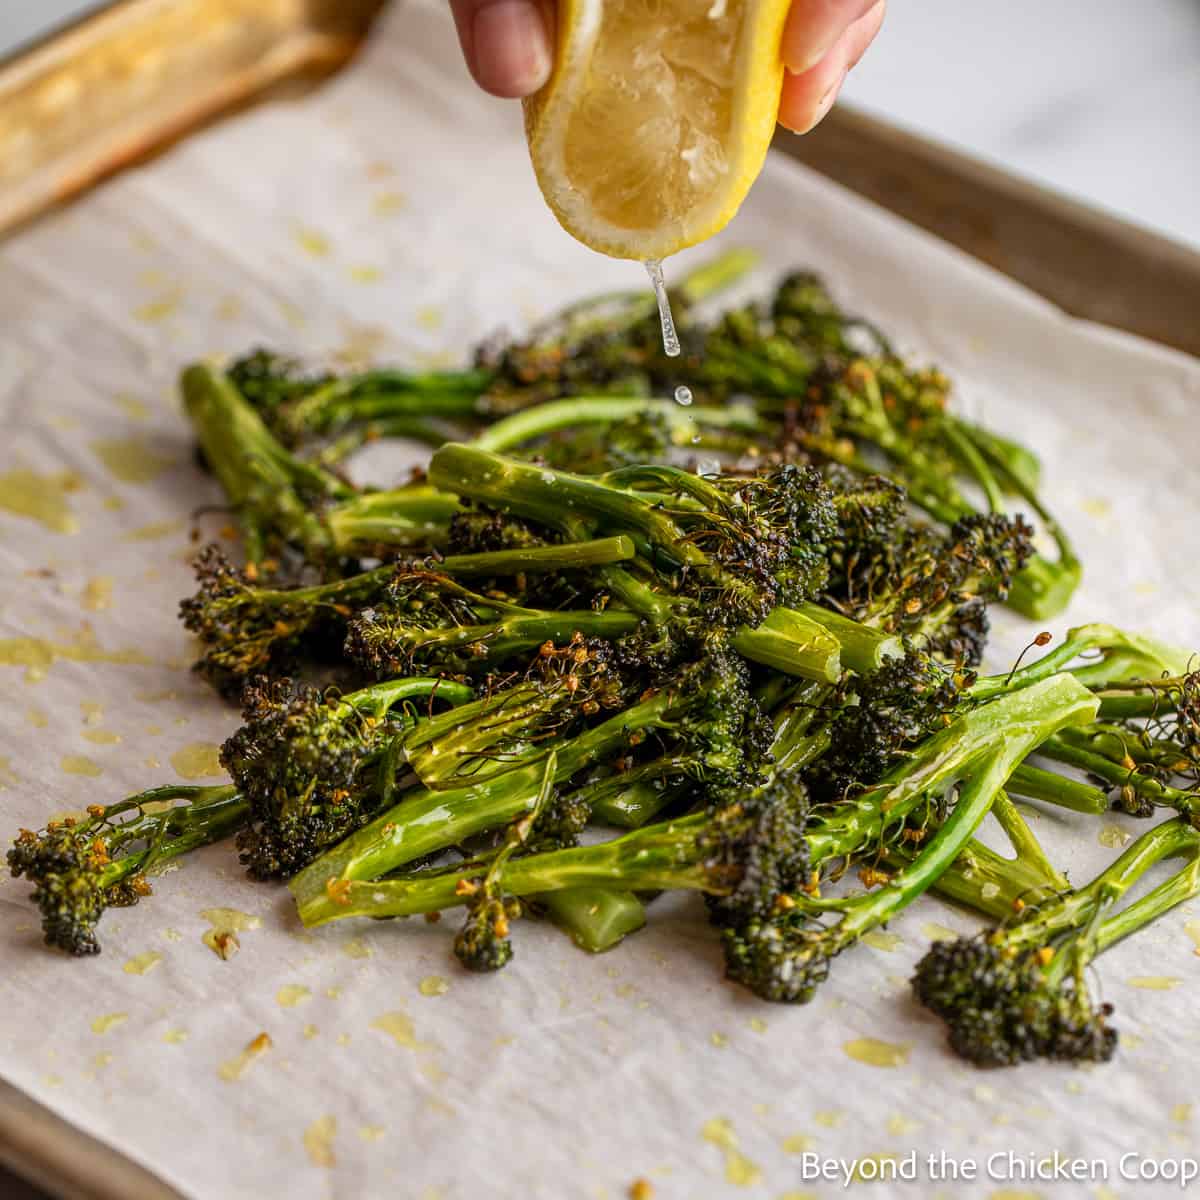 Lemon juice being squeezed over cooked broccoli. 